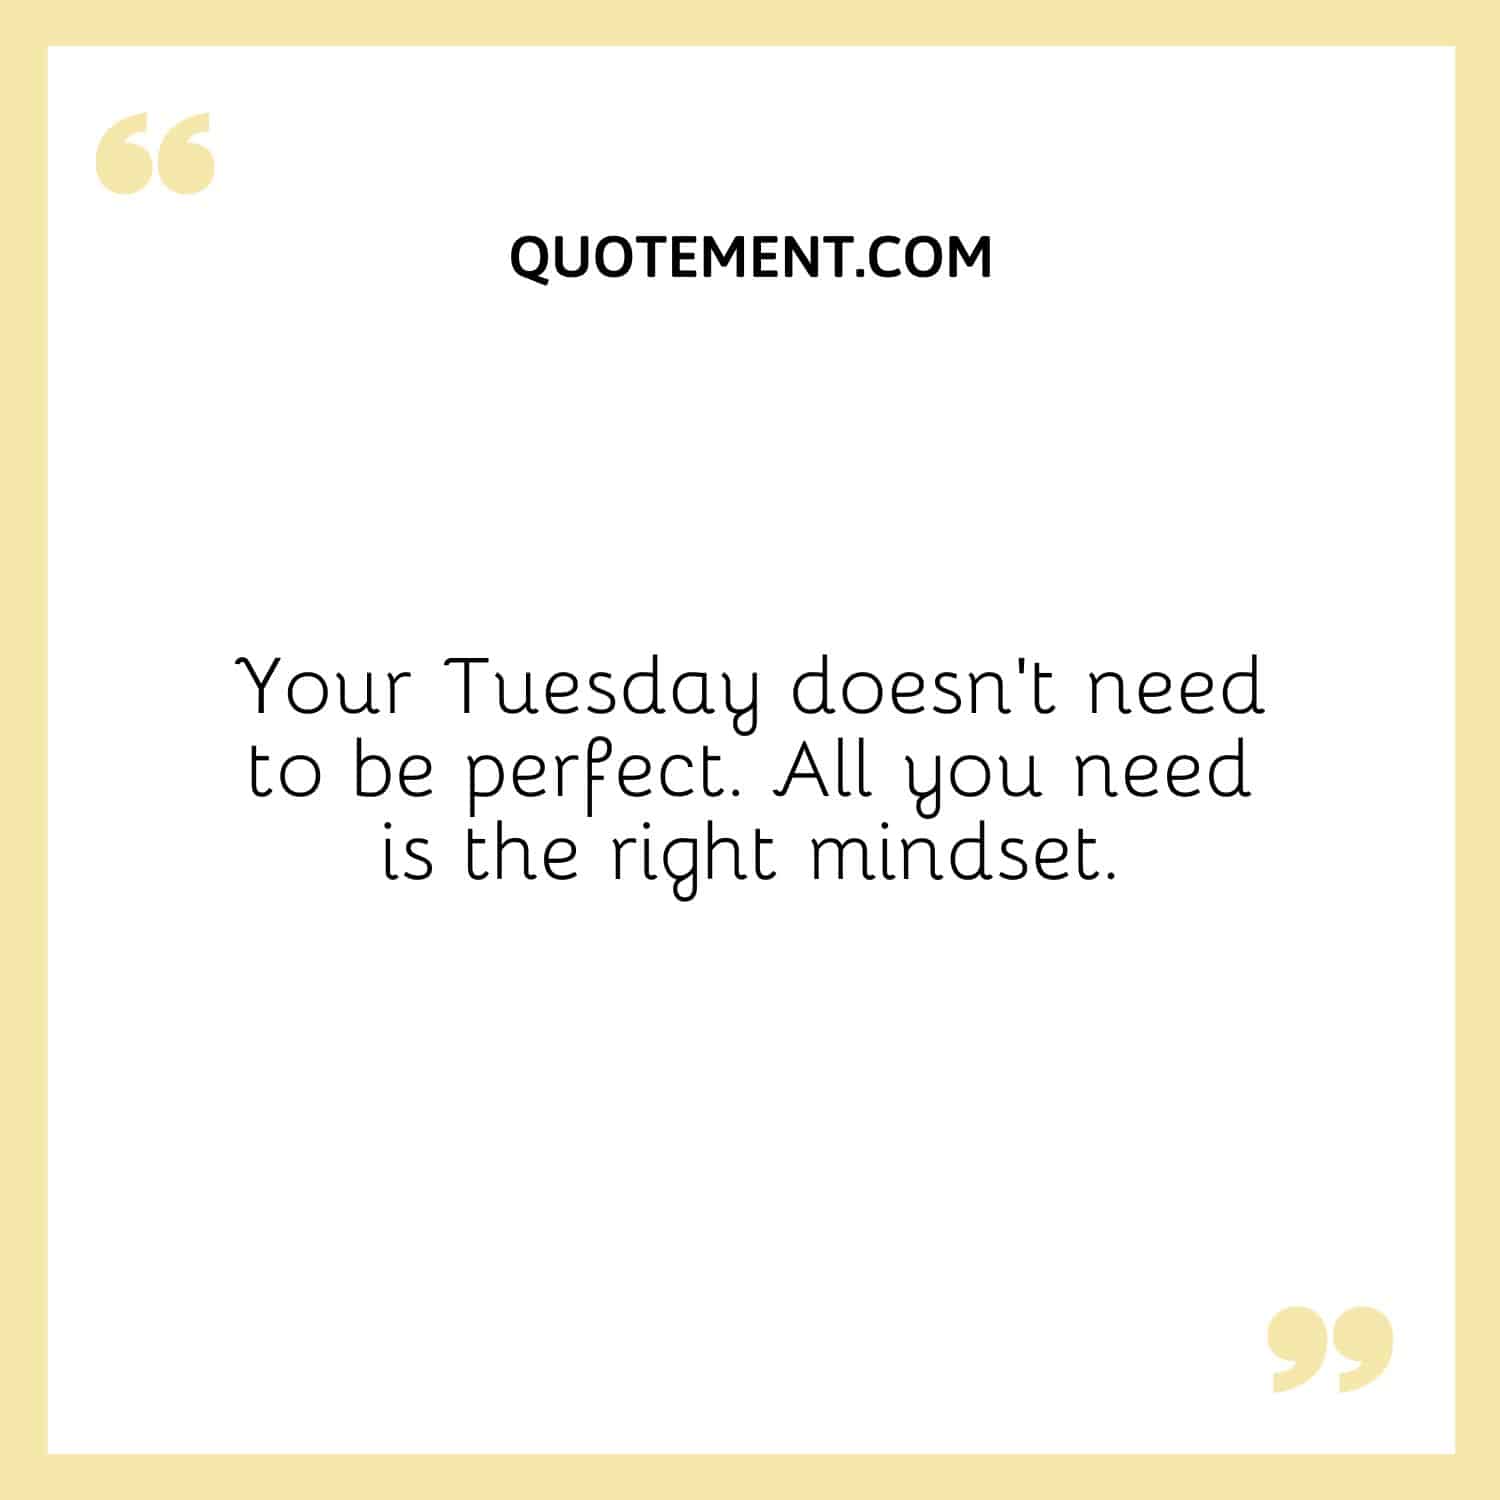 Your Tuesday doesn’t need to be perfect. All you need is the right mindset.